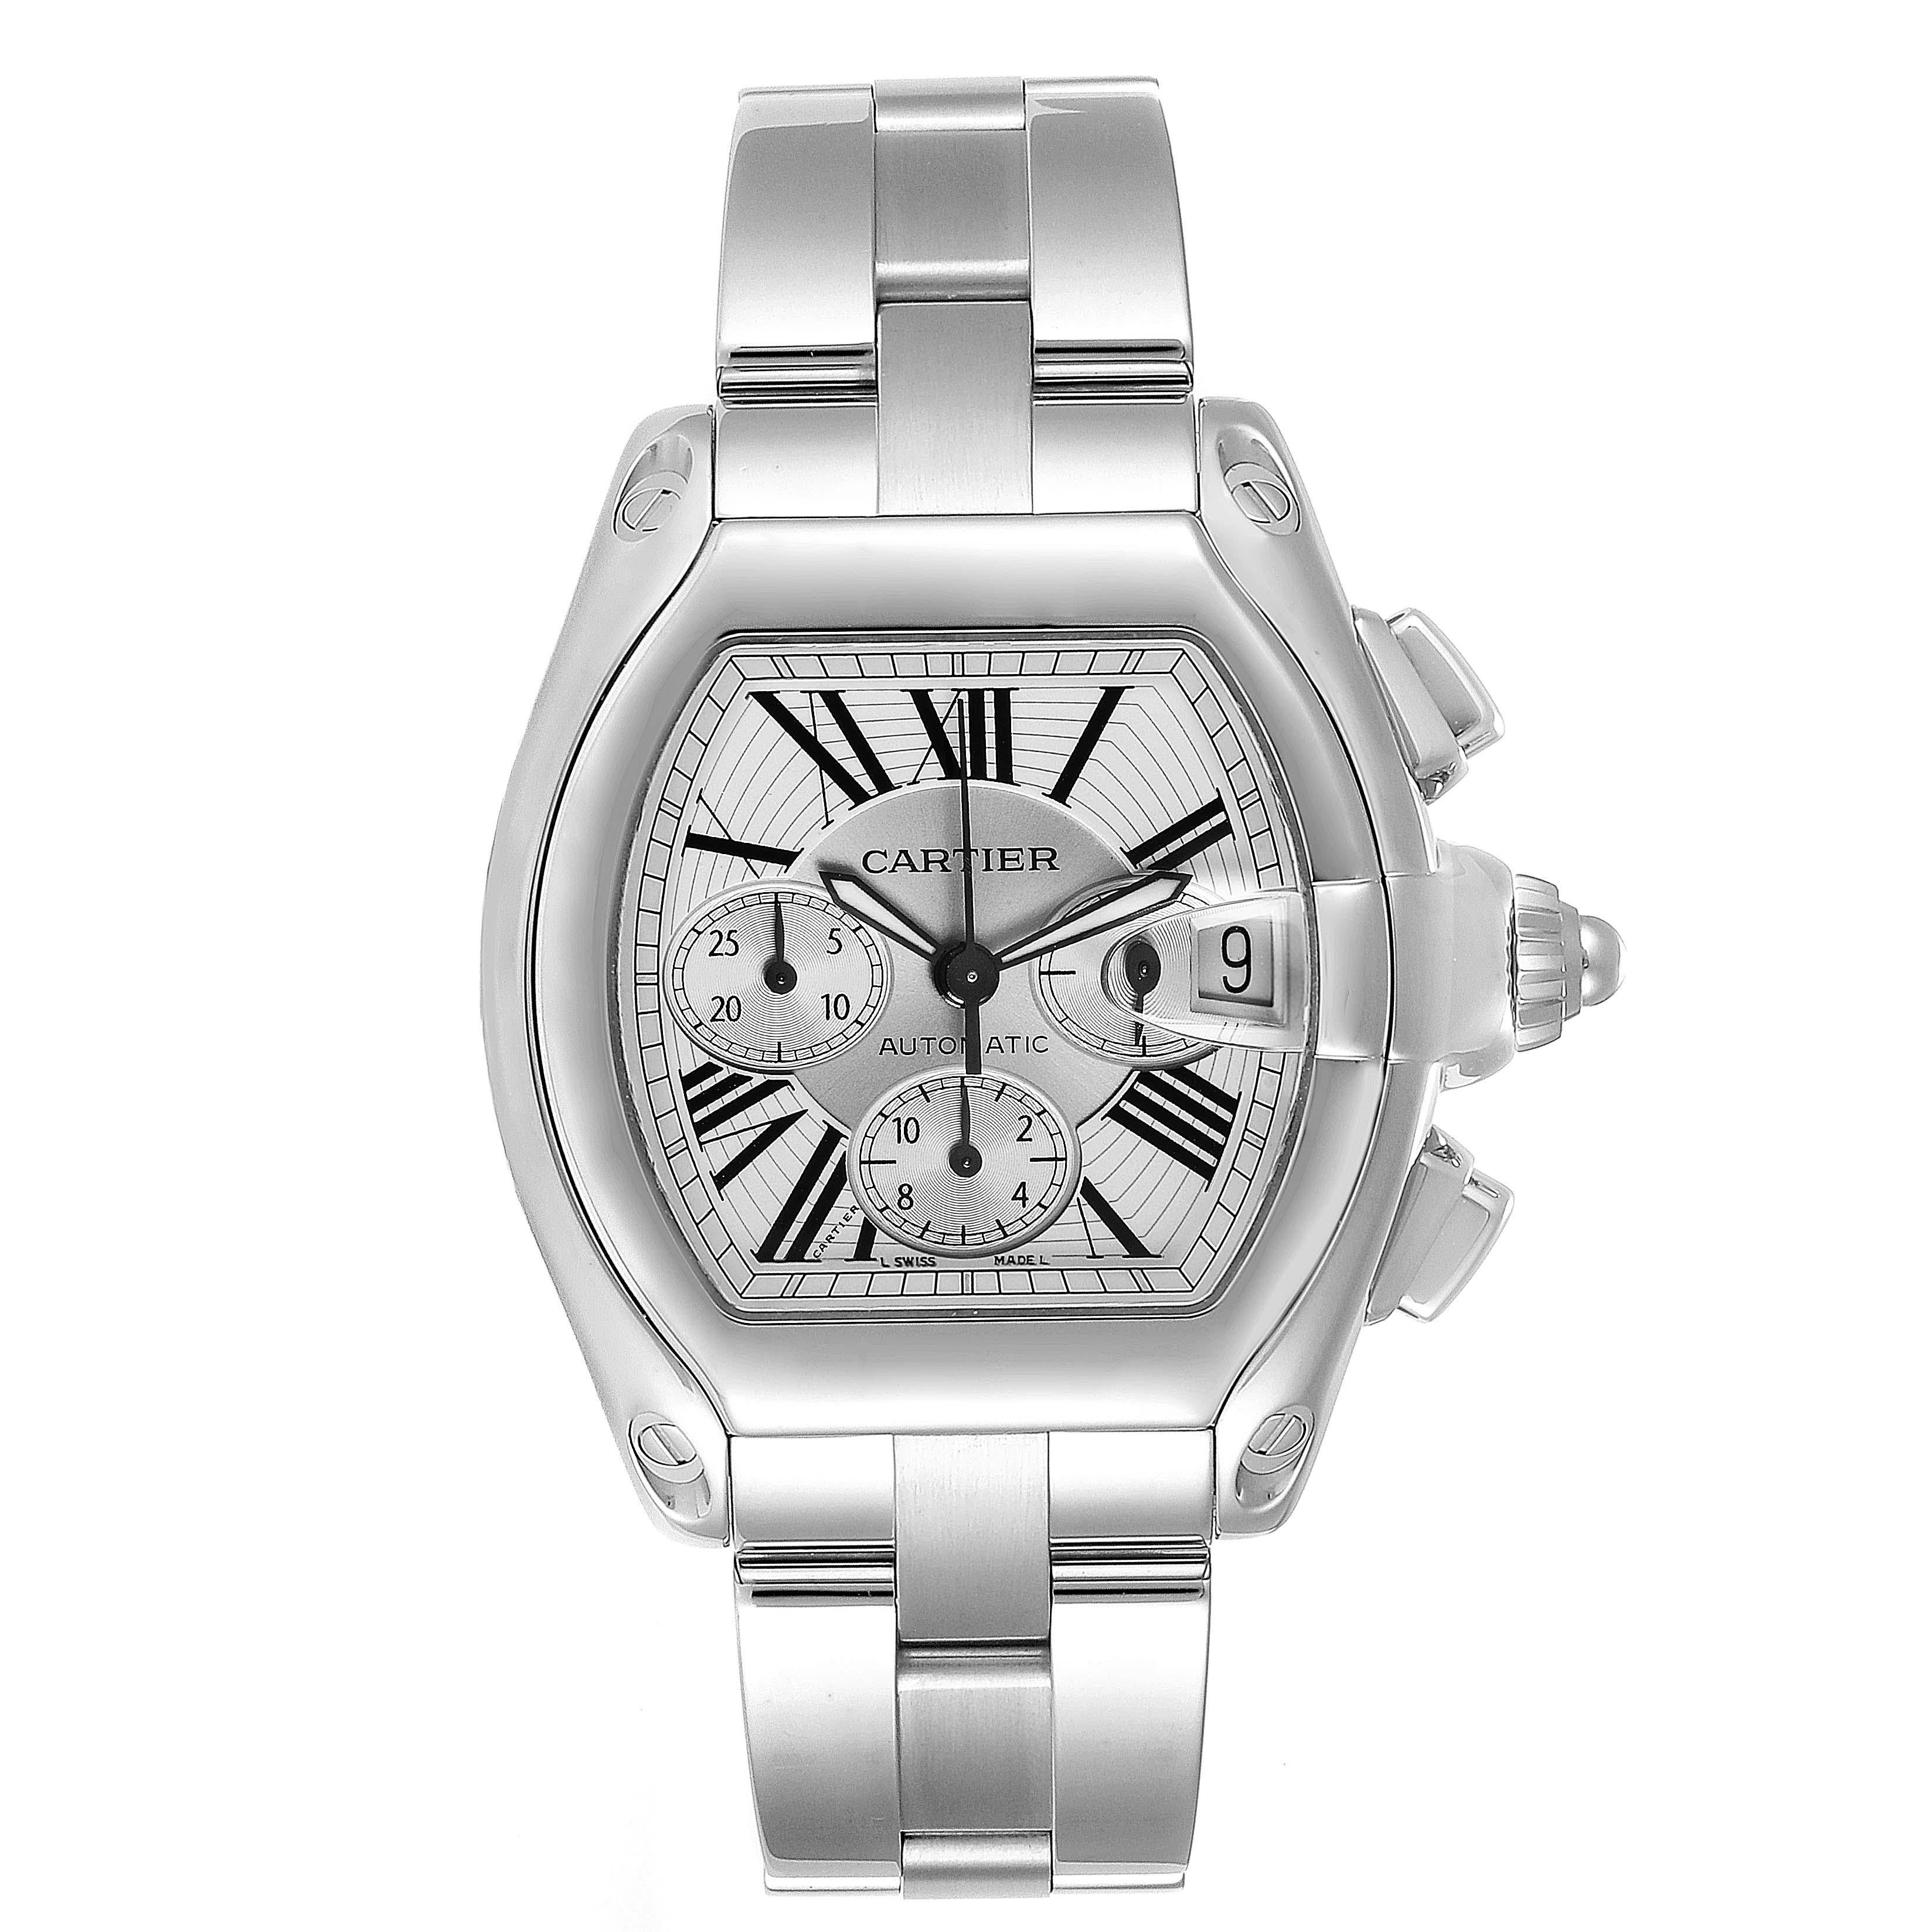 Cartier Roadster XL Chronograph Automatic Mens Watch W62019X6 Box. Automatic self-winding movement with chronograph function. Stainless steel tonneau shaped case 49 x 43mm. . Scratch resistant sapphire crystal with cyclops magnifying glass. Silver